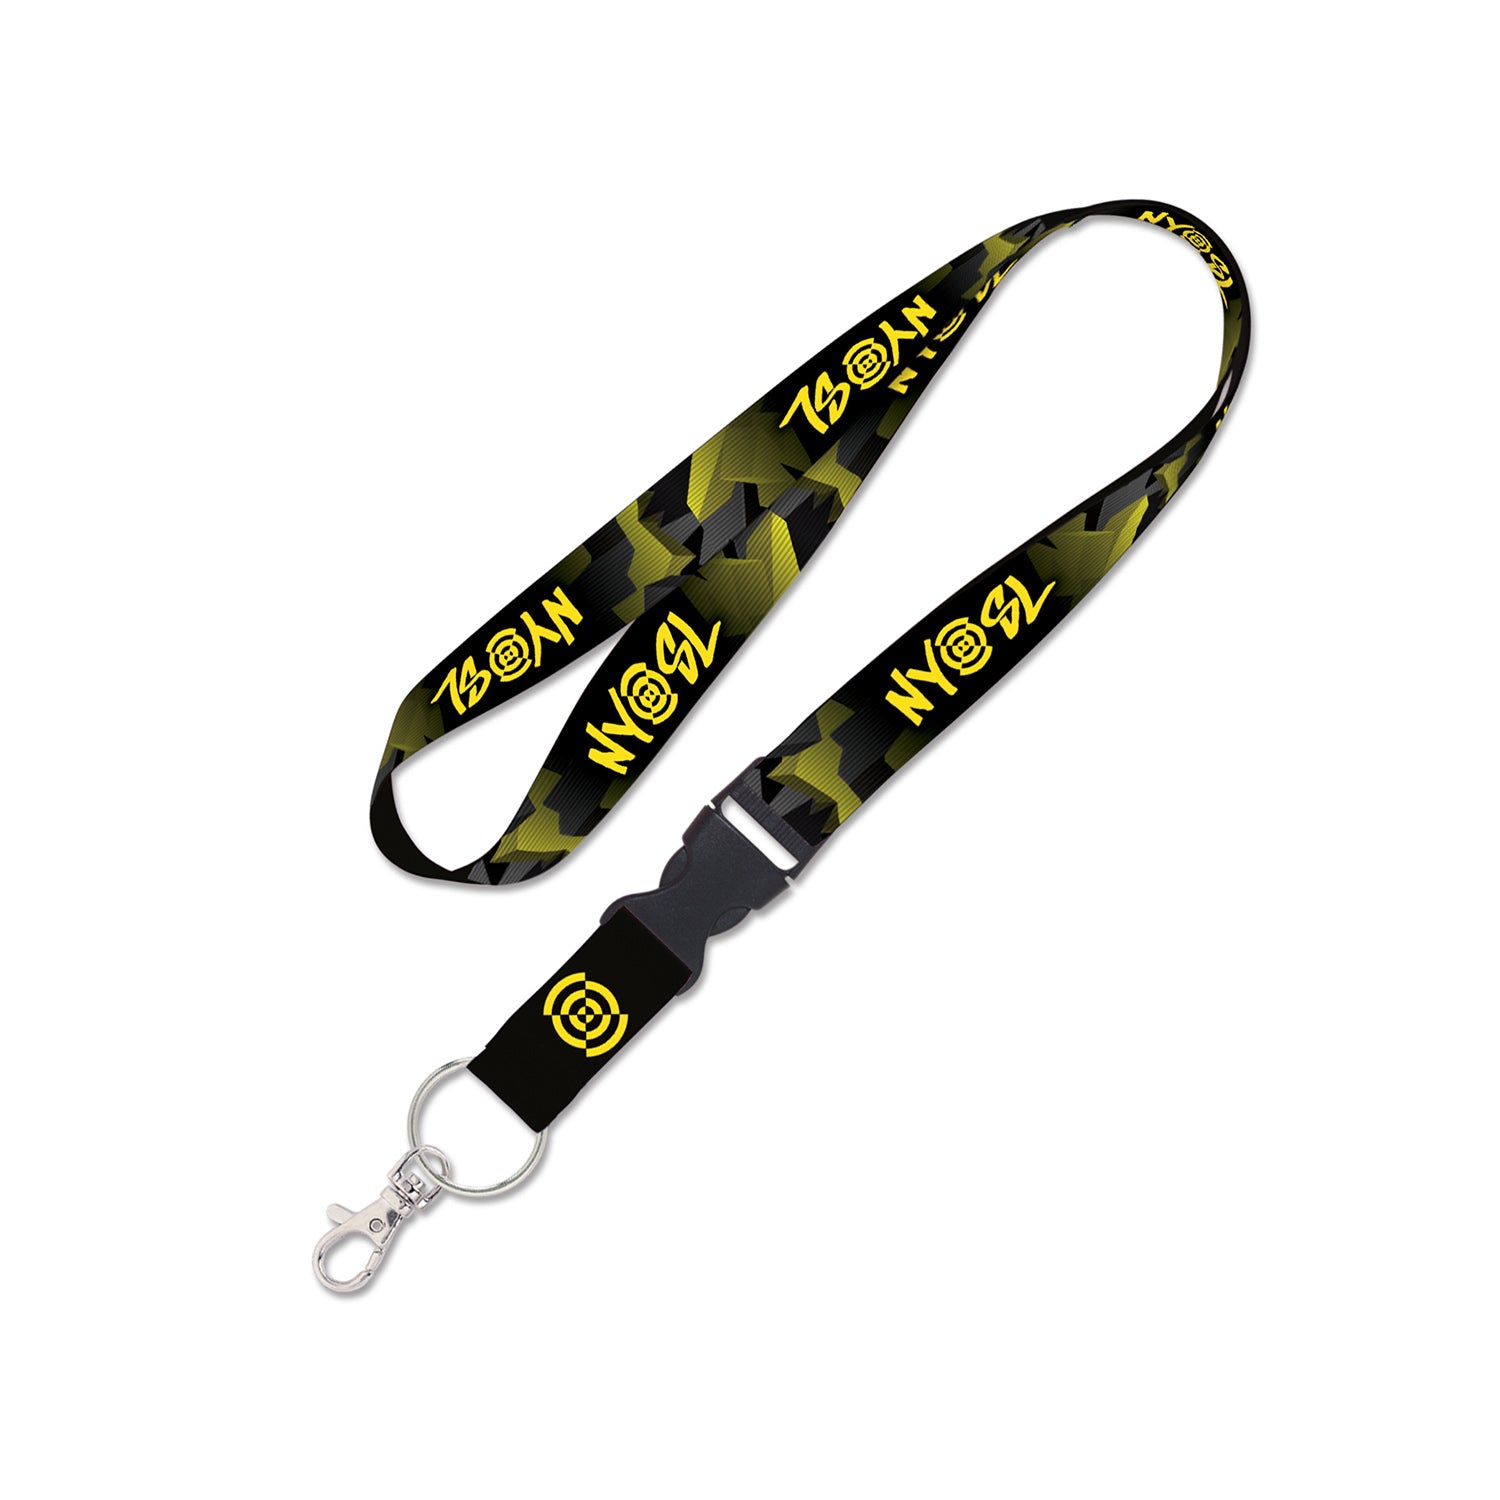 New York Subliners Buckle Lanyard - Front View